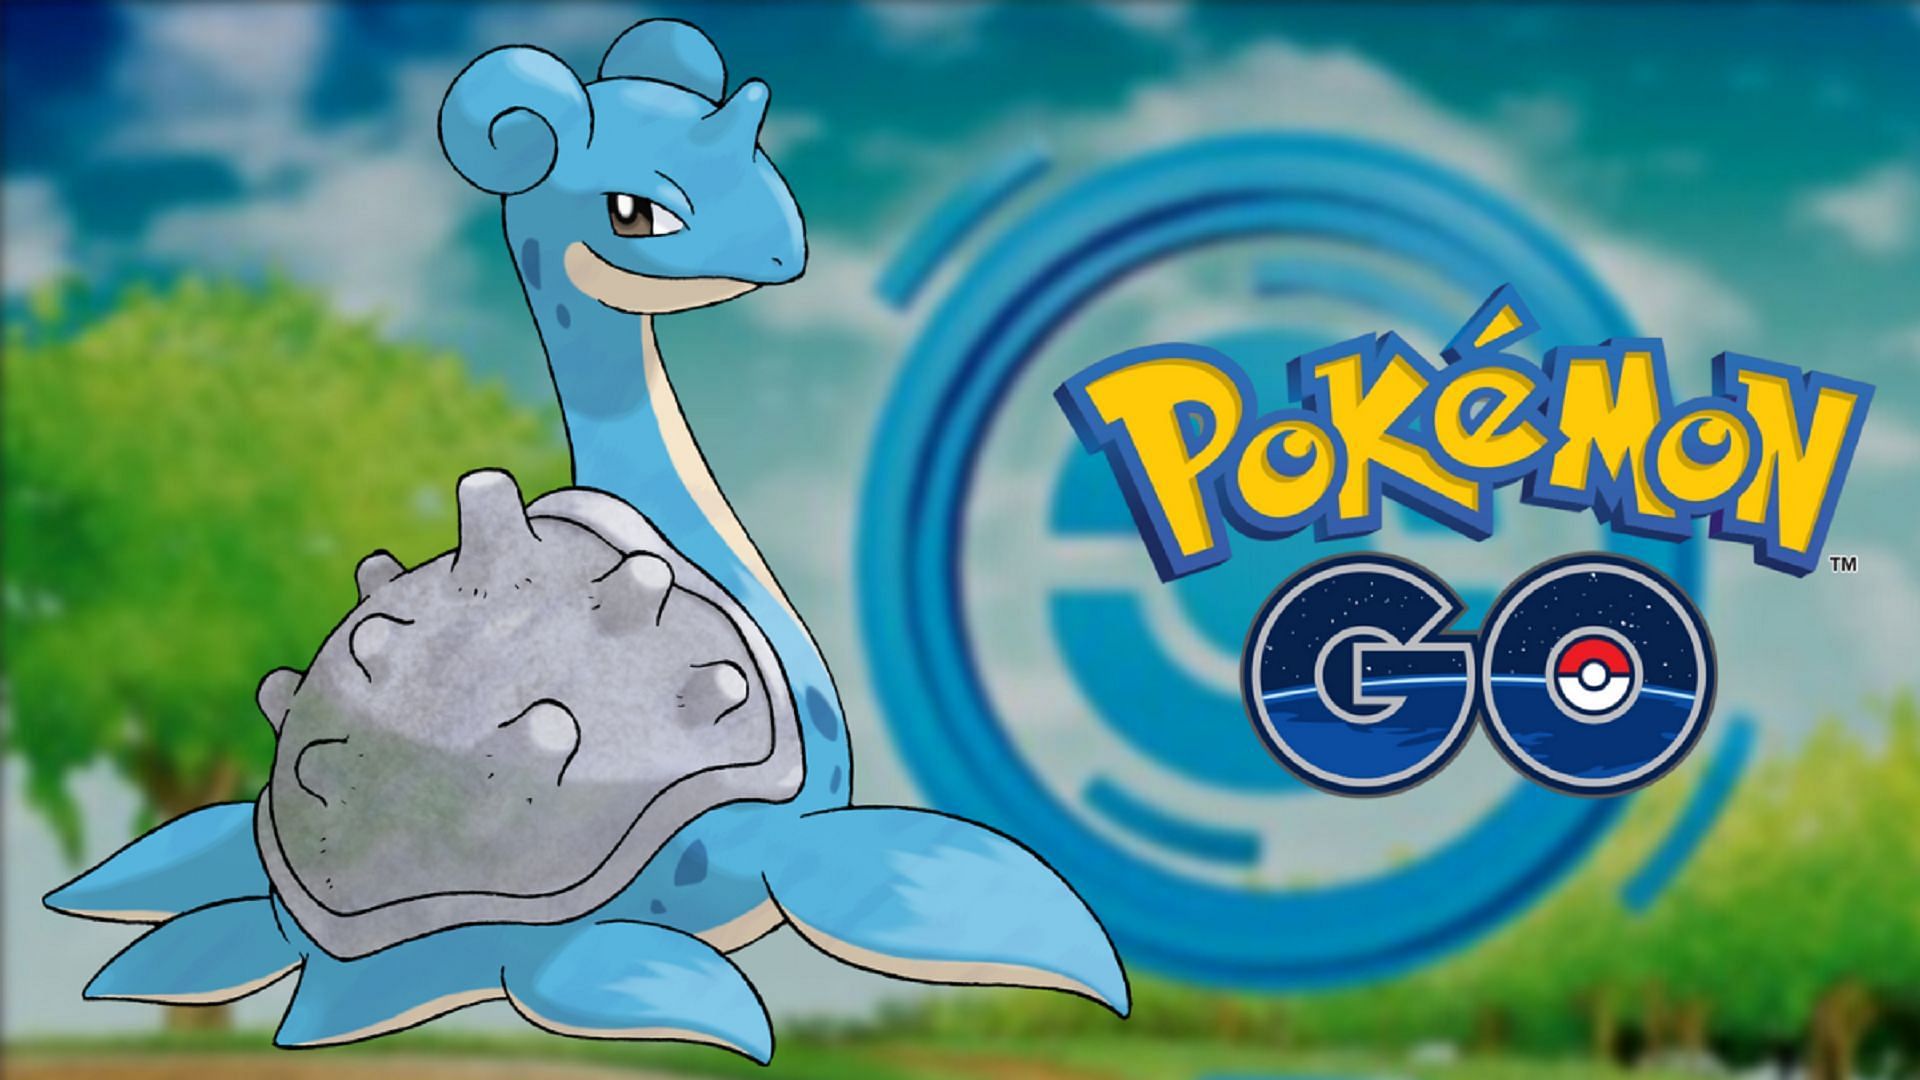 Lapras has been part of Pokemon GO since the game